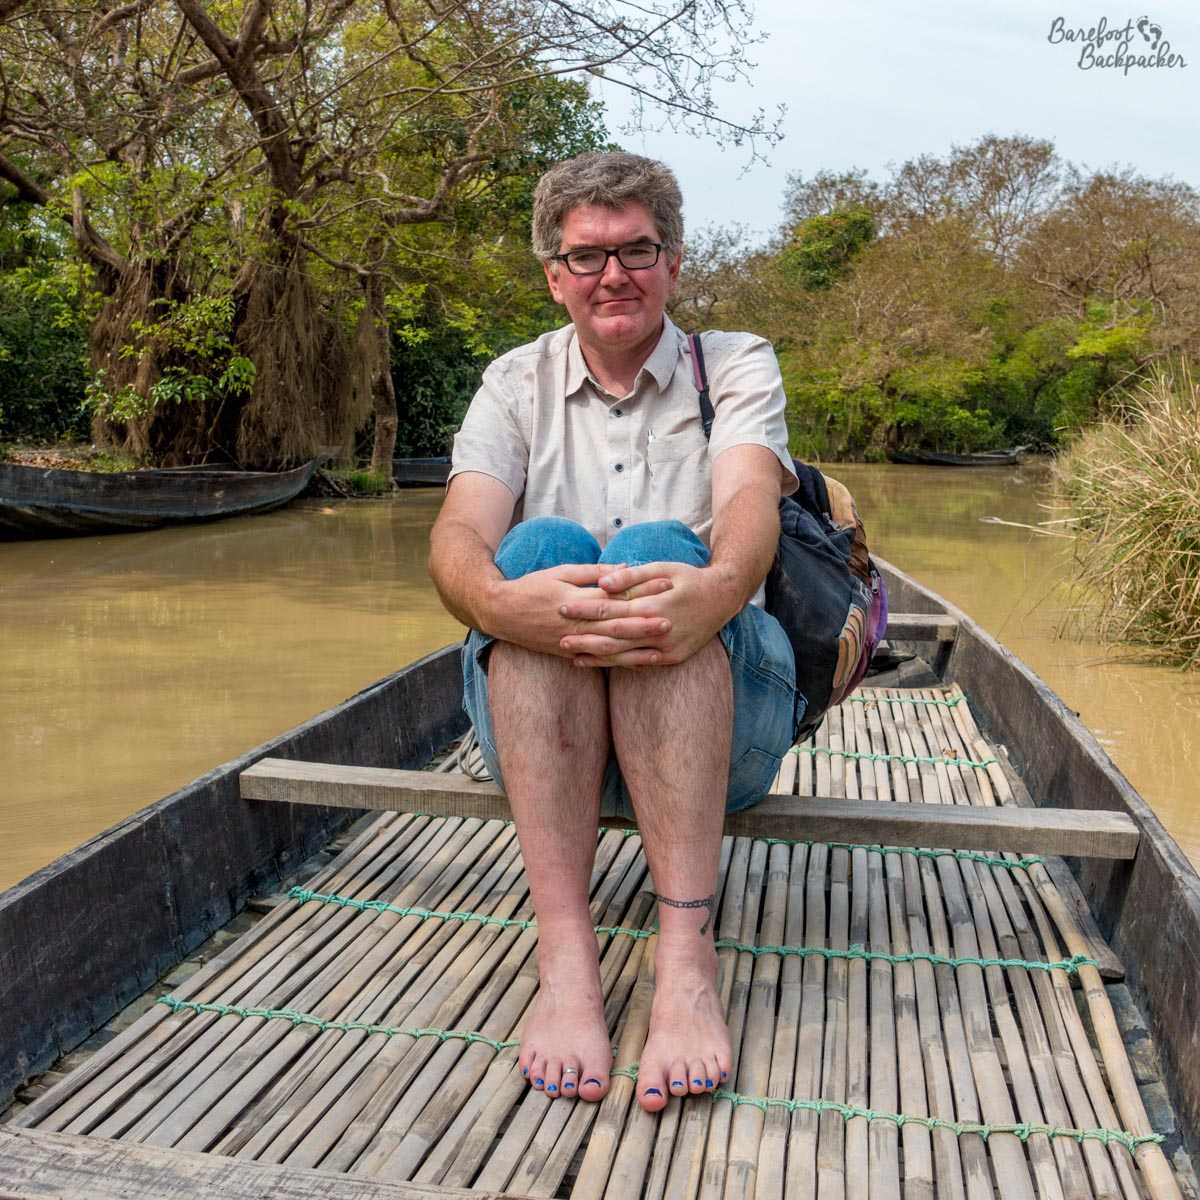 The Barefoot Backpacker, sitting on a canoe/boat in the Ratargul swamp forest